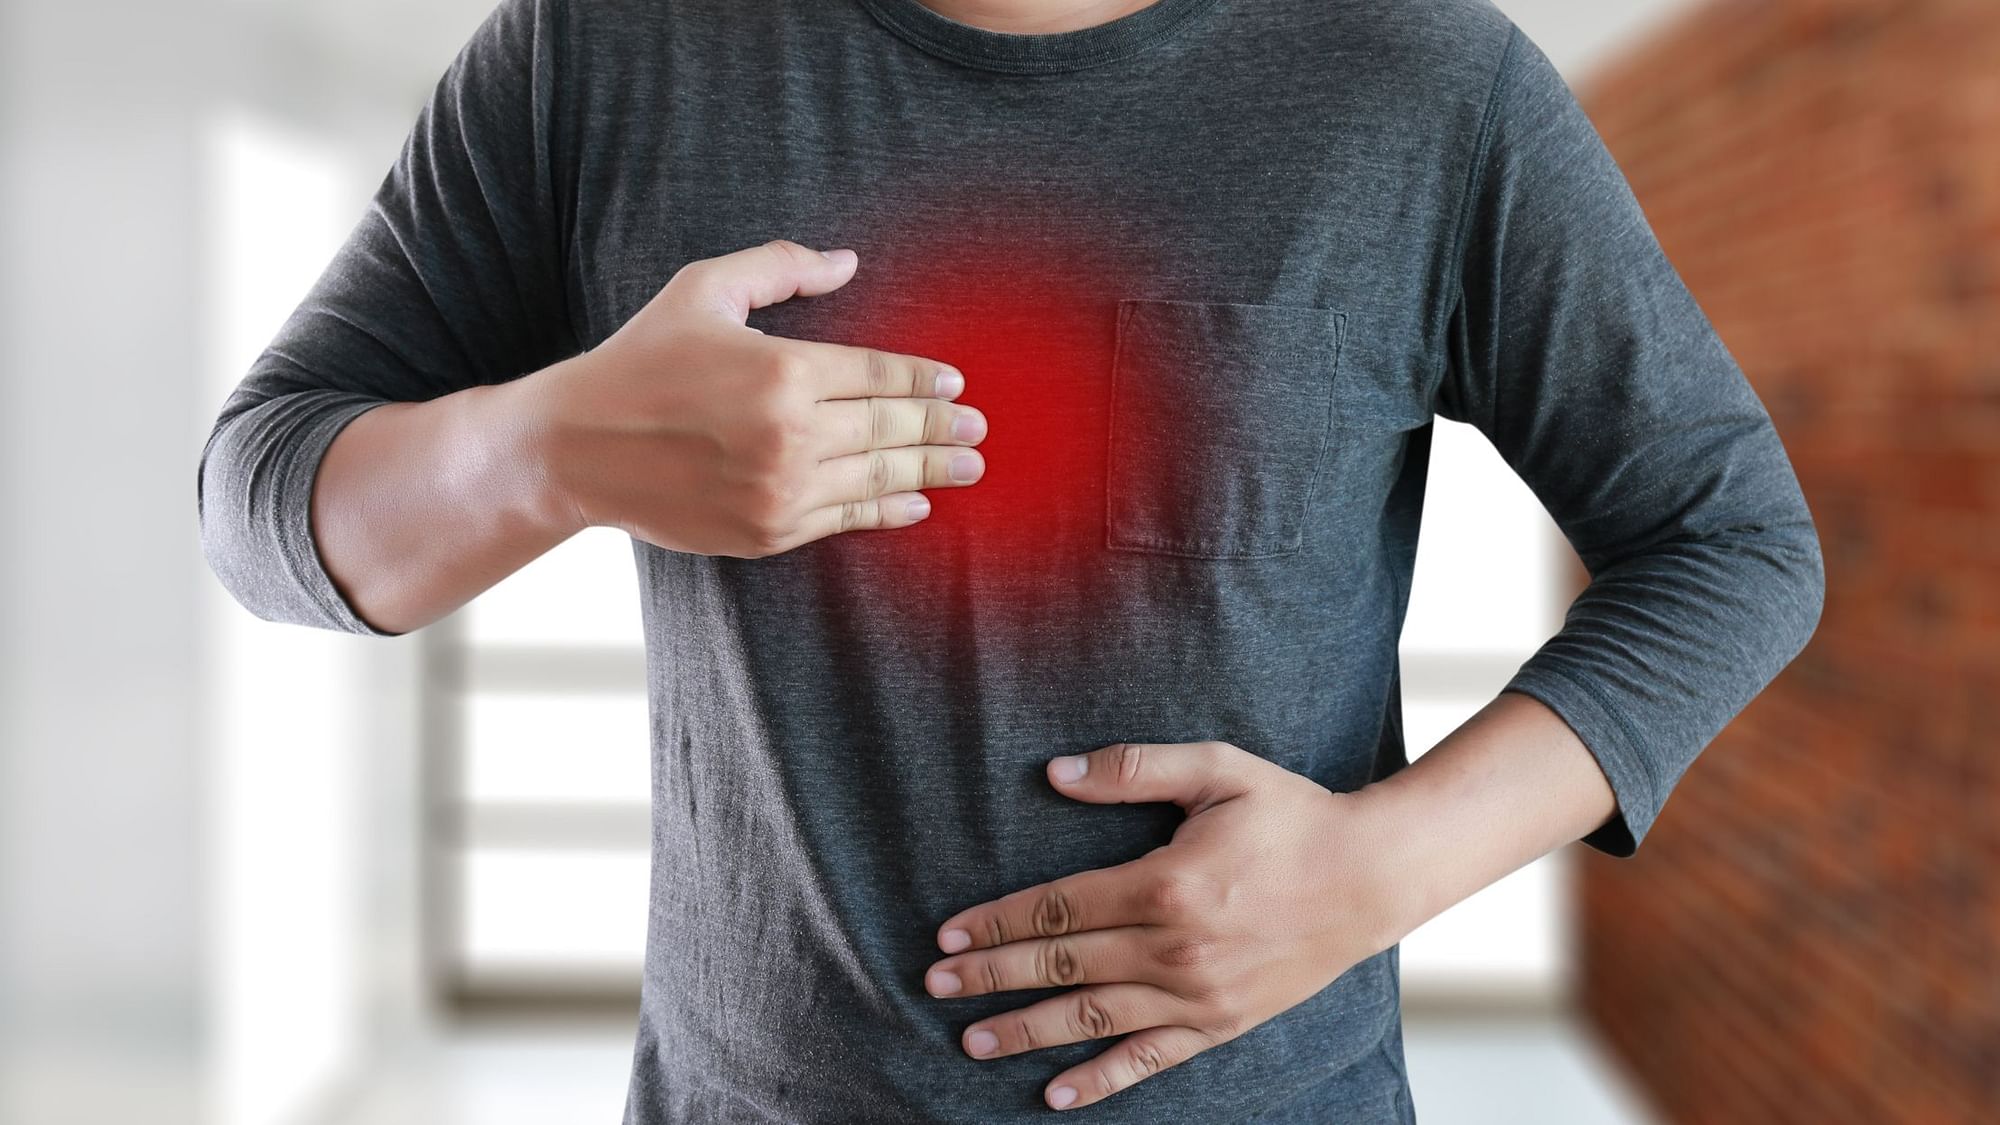 Acid reflux trigger foods vary from person to person, try to identify the foods that cause an increase in your symptoms.